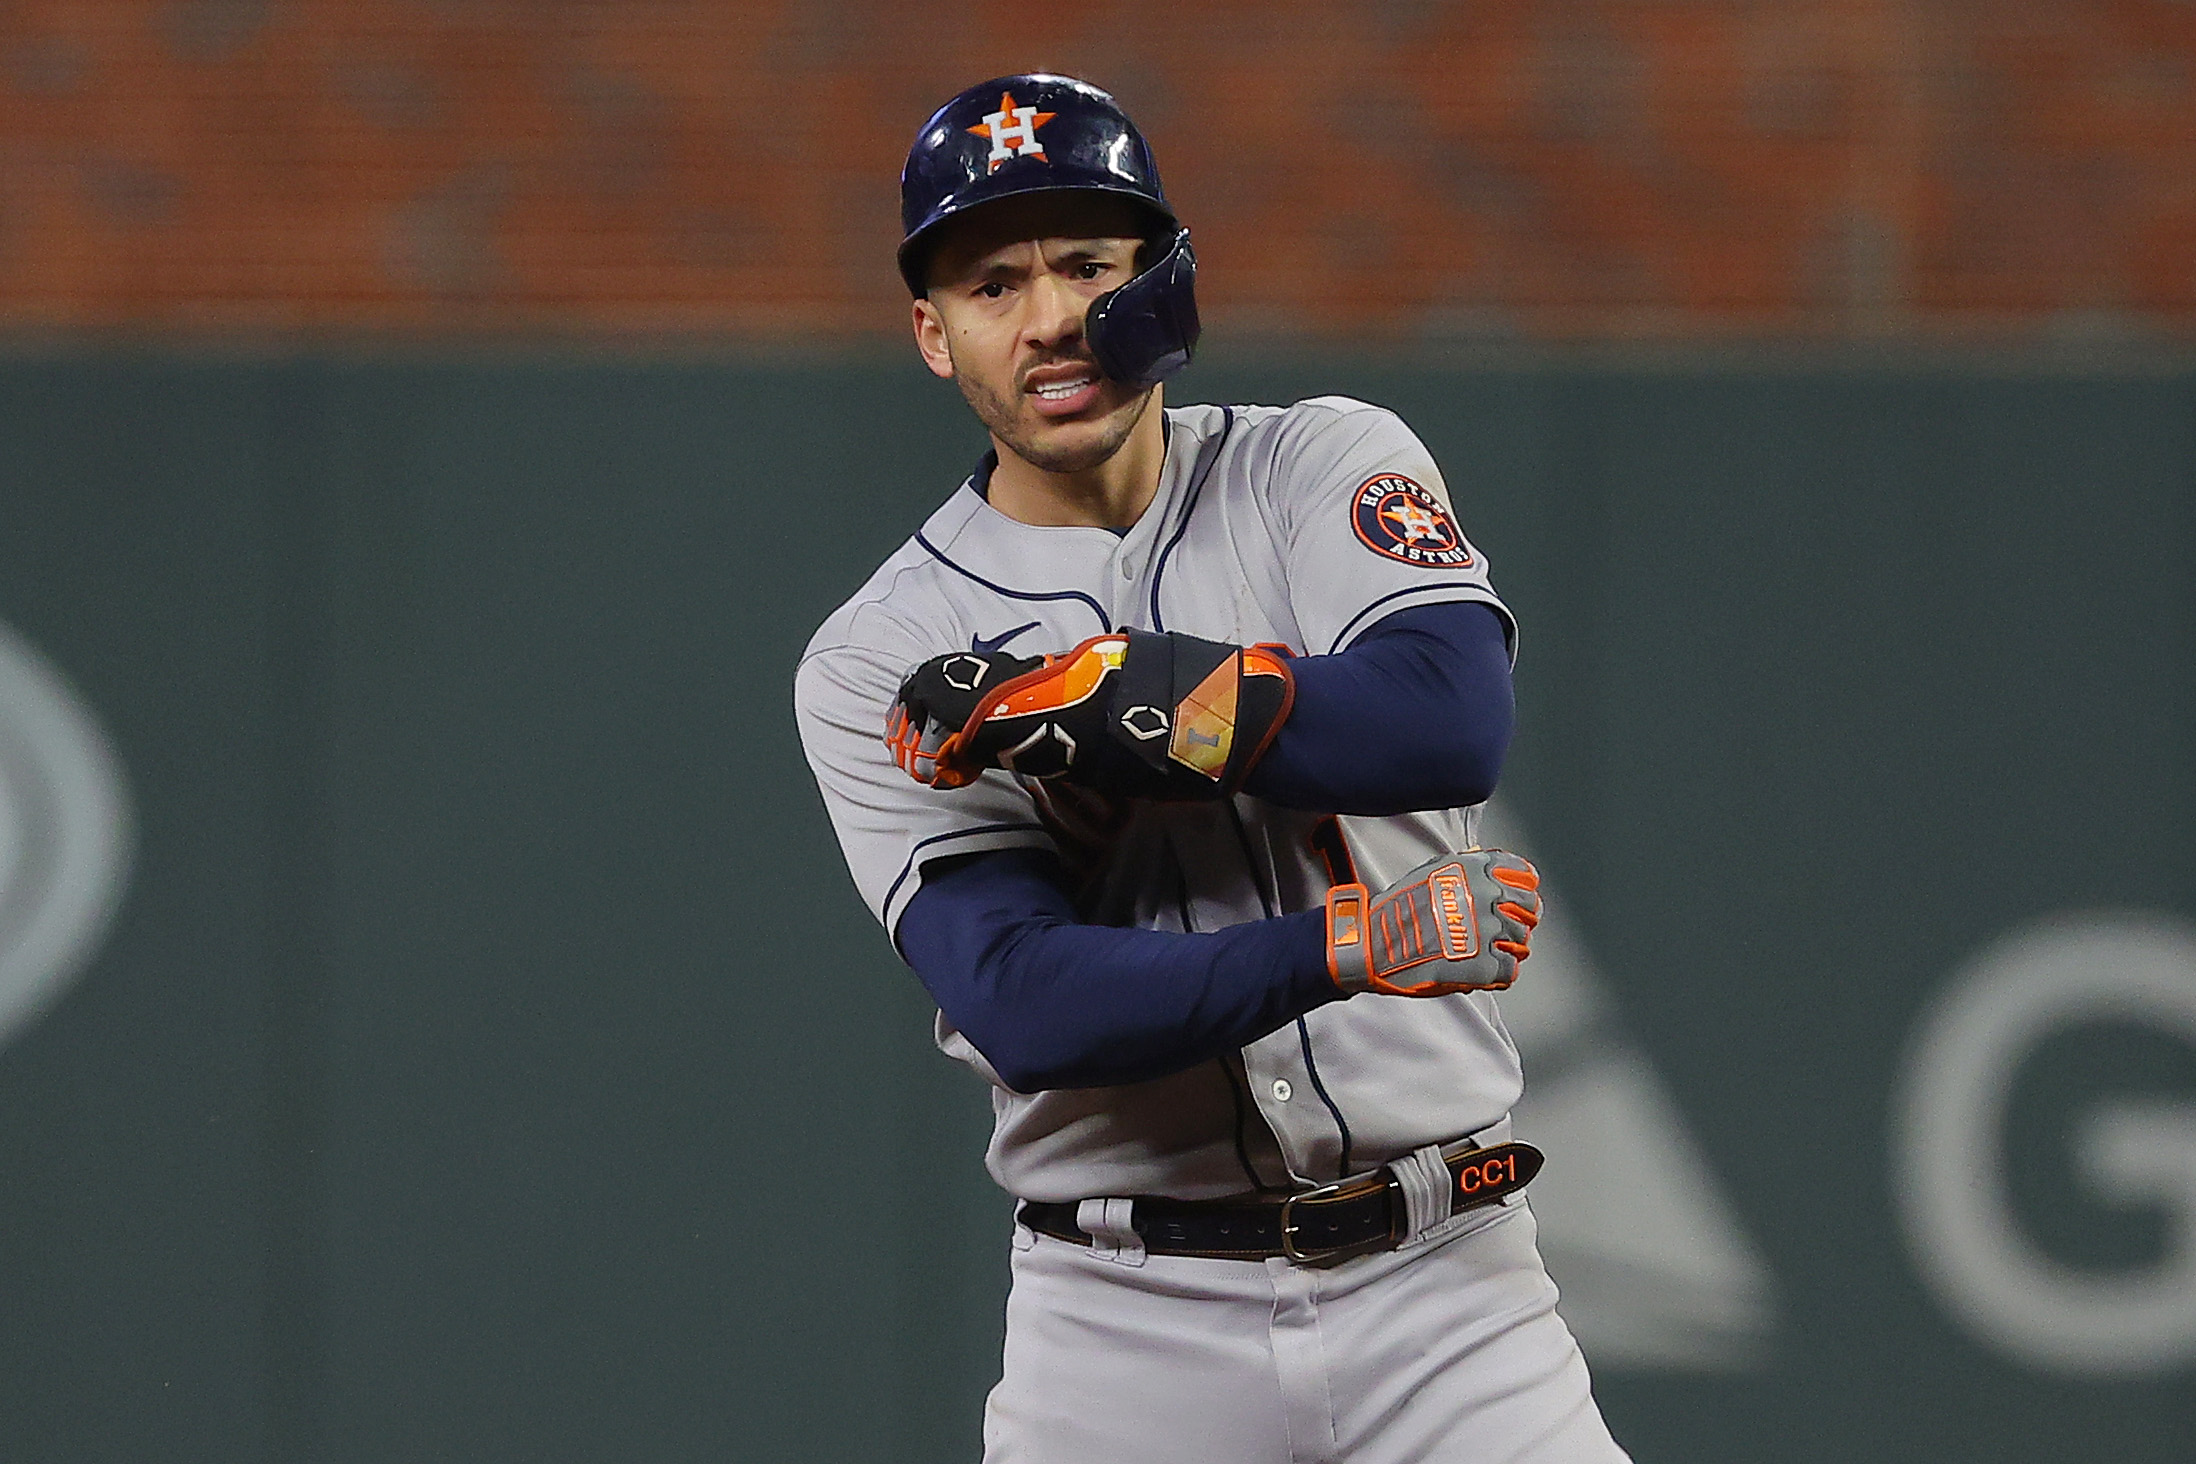 Carlos Correa #1 of the Houston Astros celebrates after hitting an RBI double against the Atlanta Braves during the third inning in Game Five of the World Series at Truist Park on October 31, 2021 in Atlanta, Georgia.